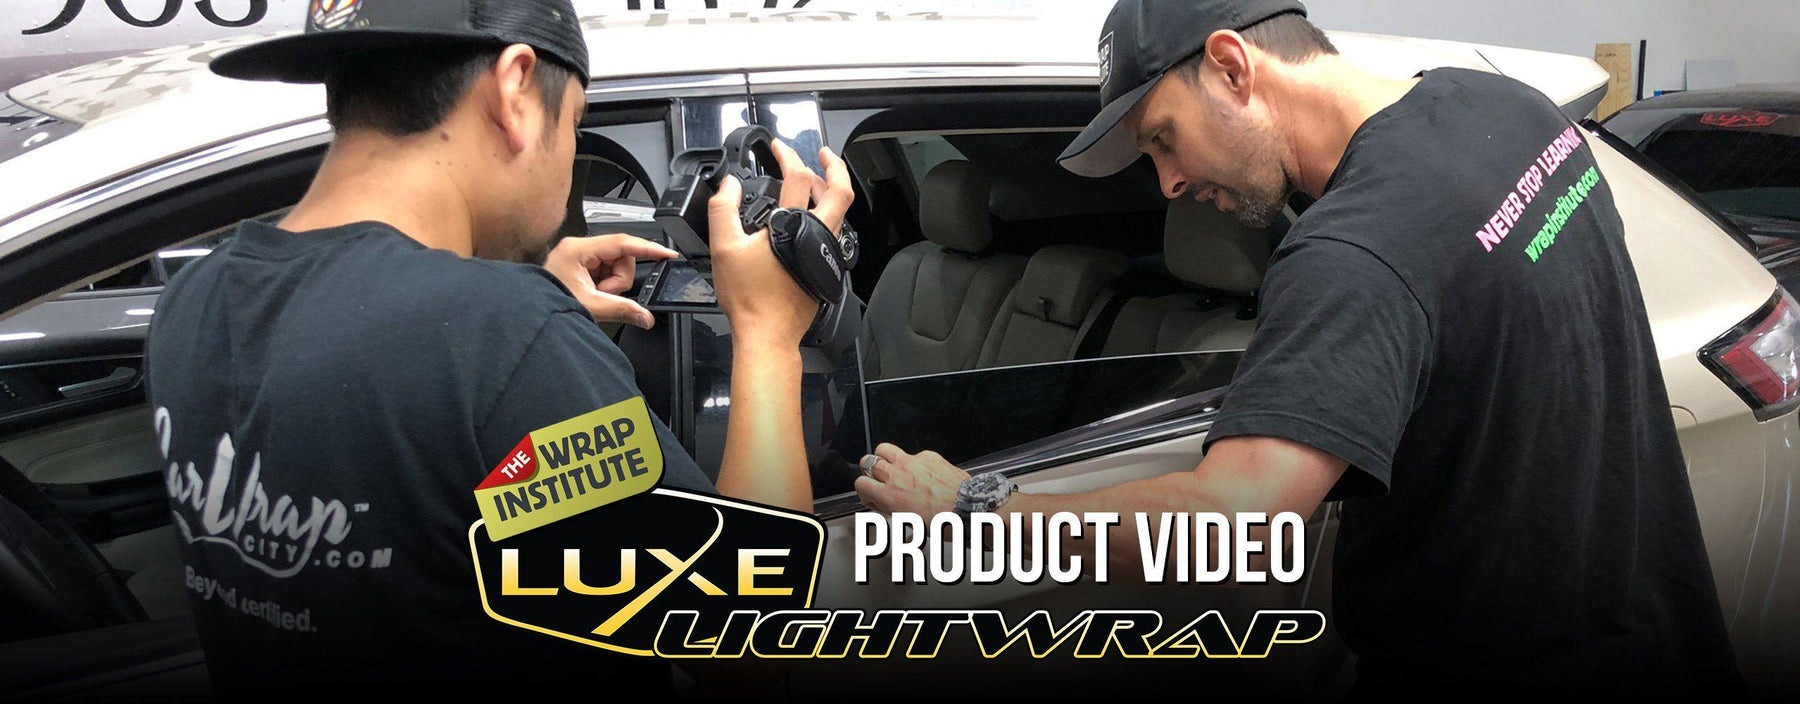 LightWrap Product Video by The Wrap Institute - Luxe Auto Concepts